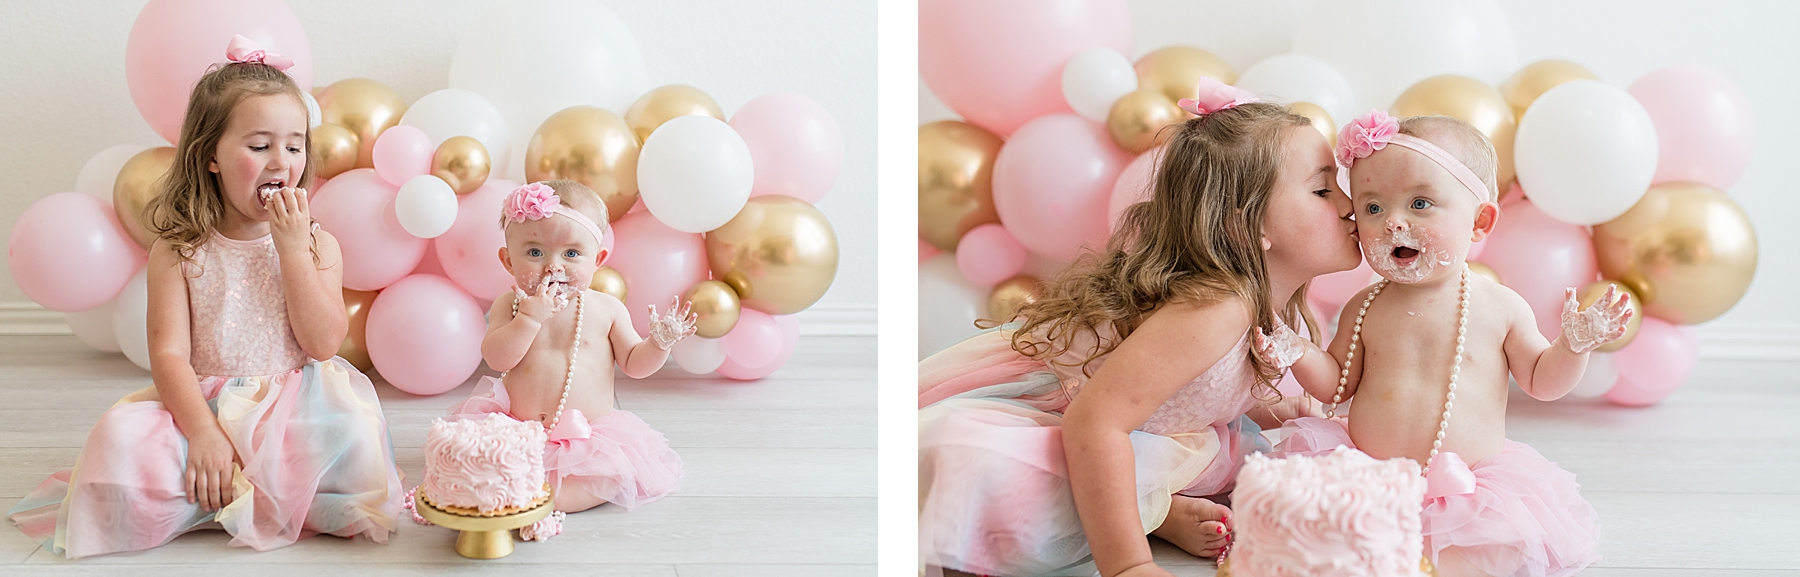 Sisters eating cake at cake smash photos. Photographed by Dallas newborn photographer Lindsey Dutton Photography